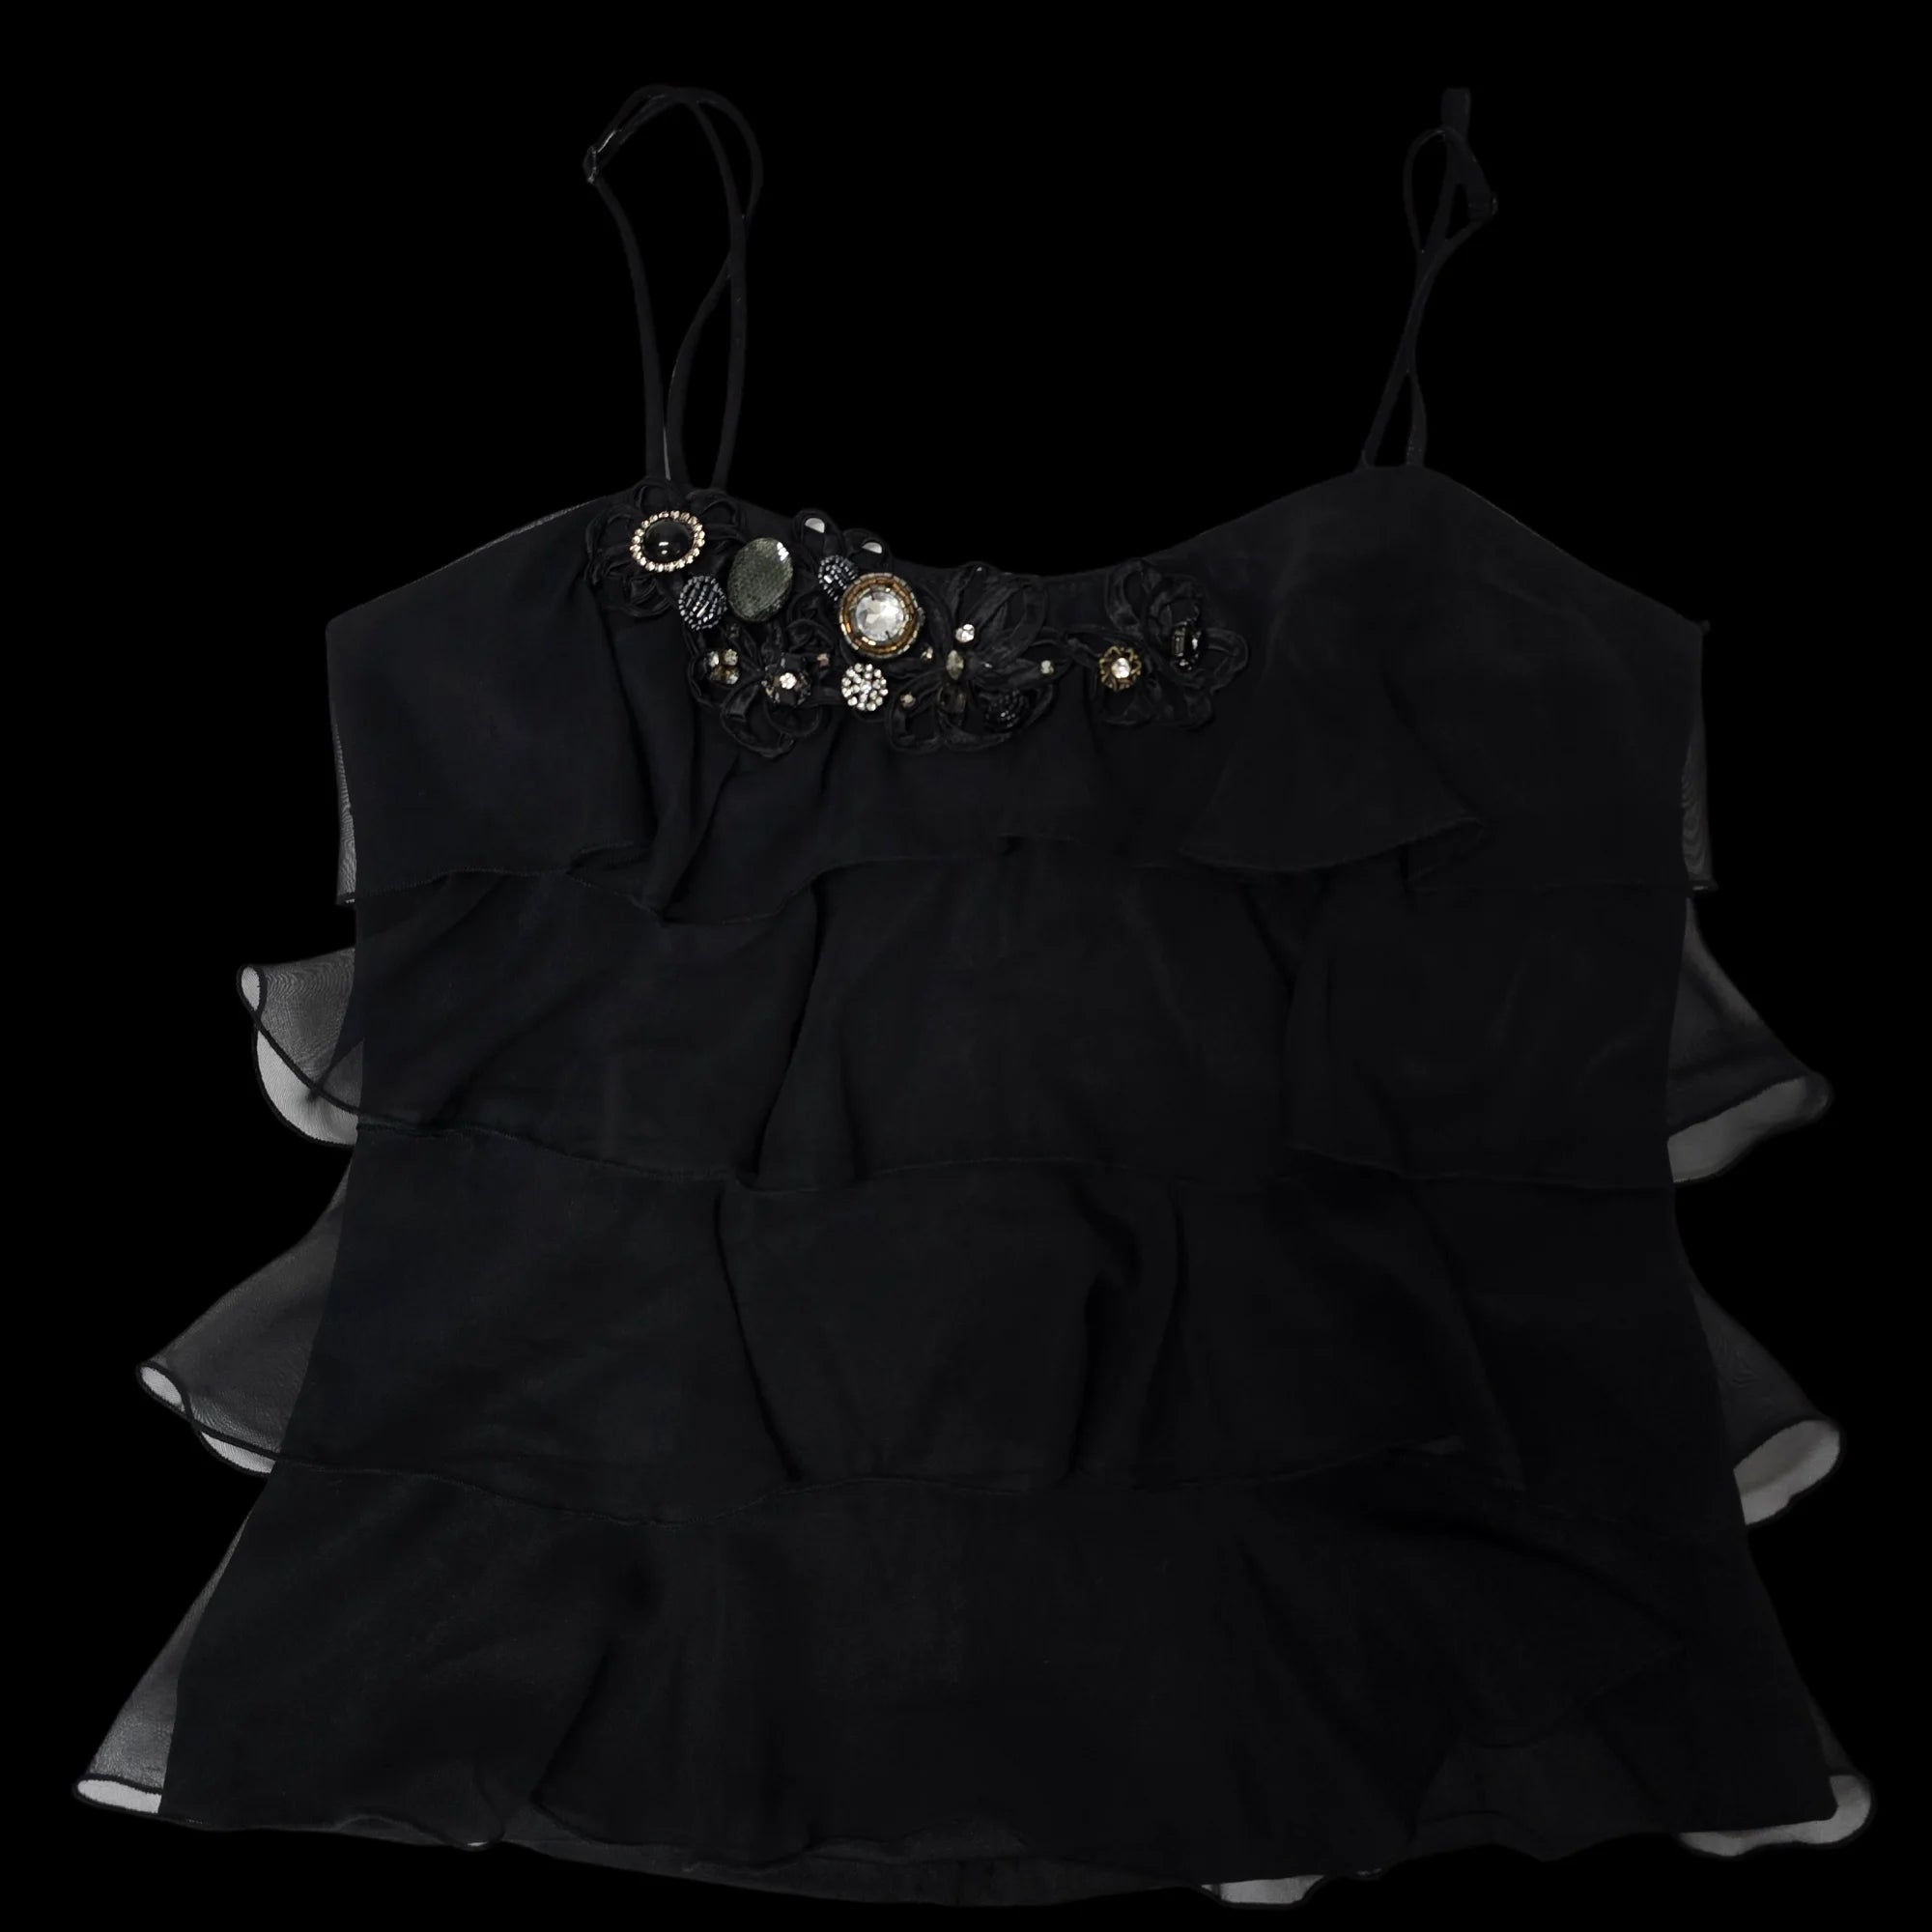 River Island Womens Black Ruffle Camisole Party Top UK 12